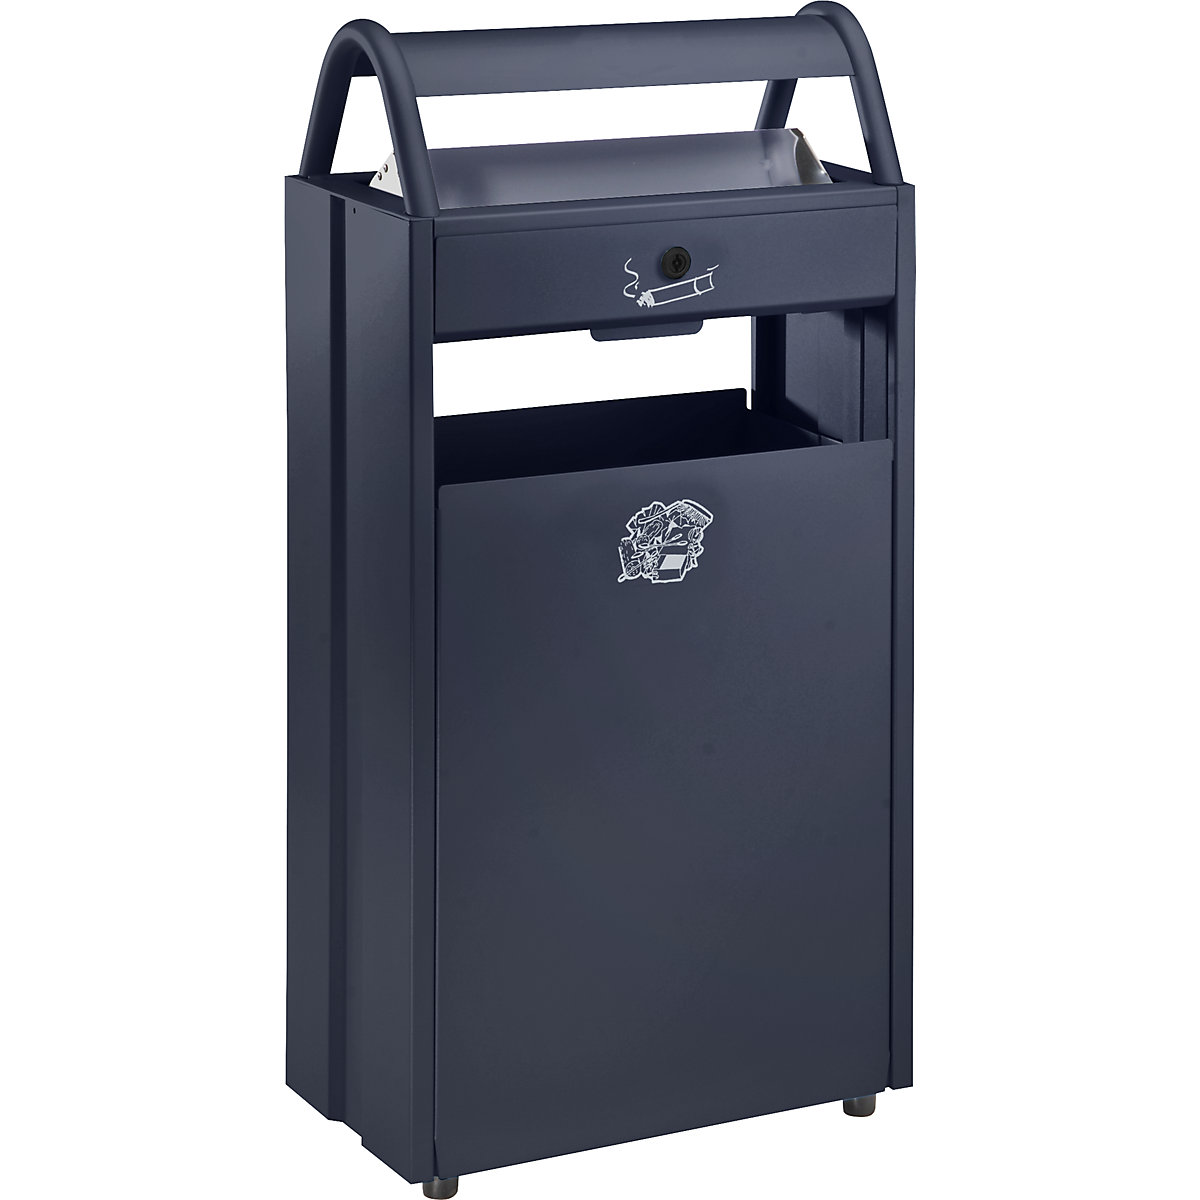 VAR – Waste collector with ashtray and rain protection hood, capacity 60 l, WxHxD 480 x 960 x 250 mm, black grey RAL 7021